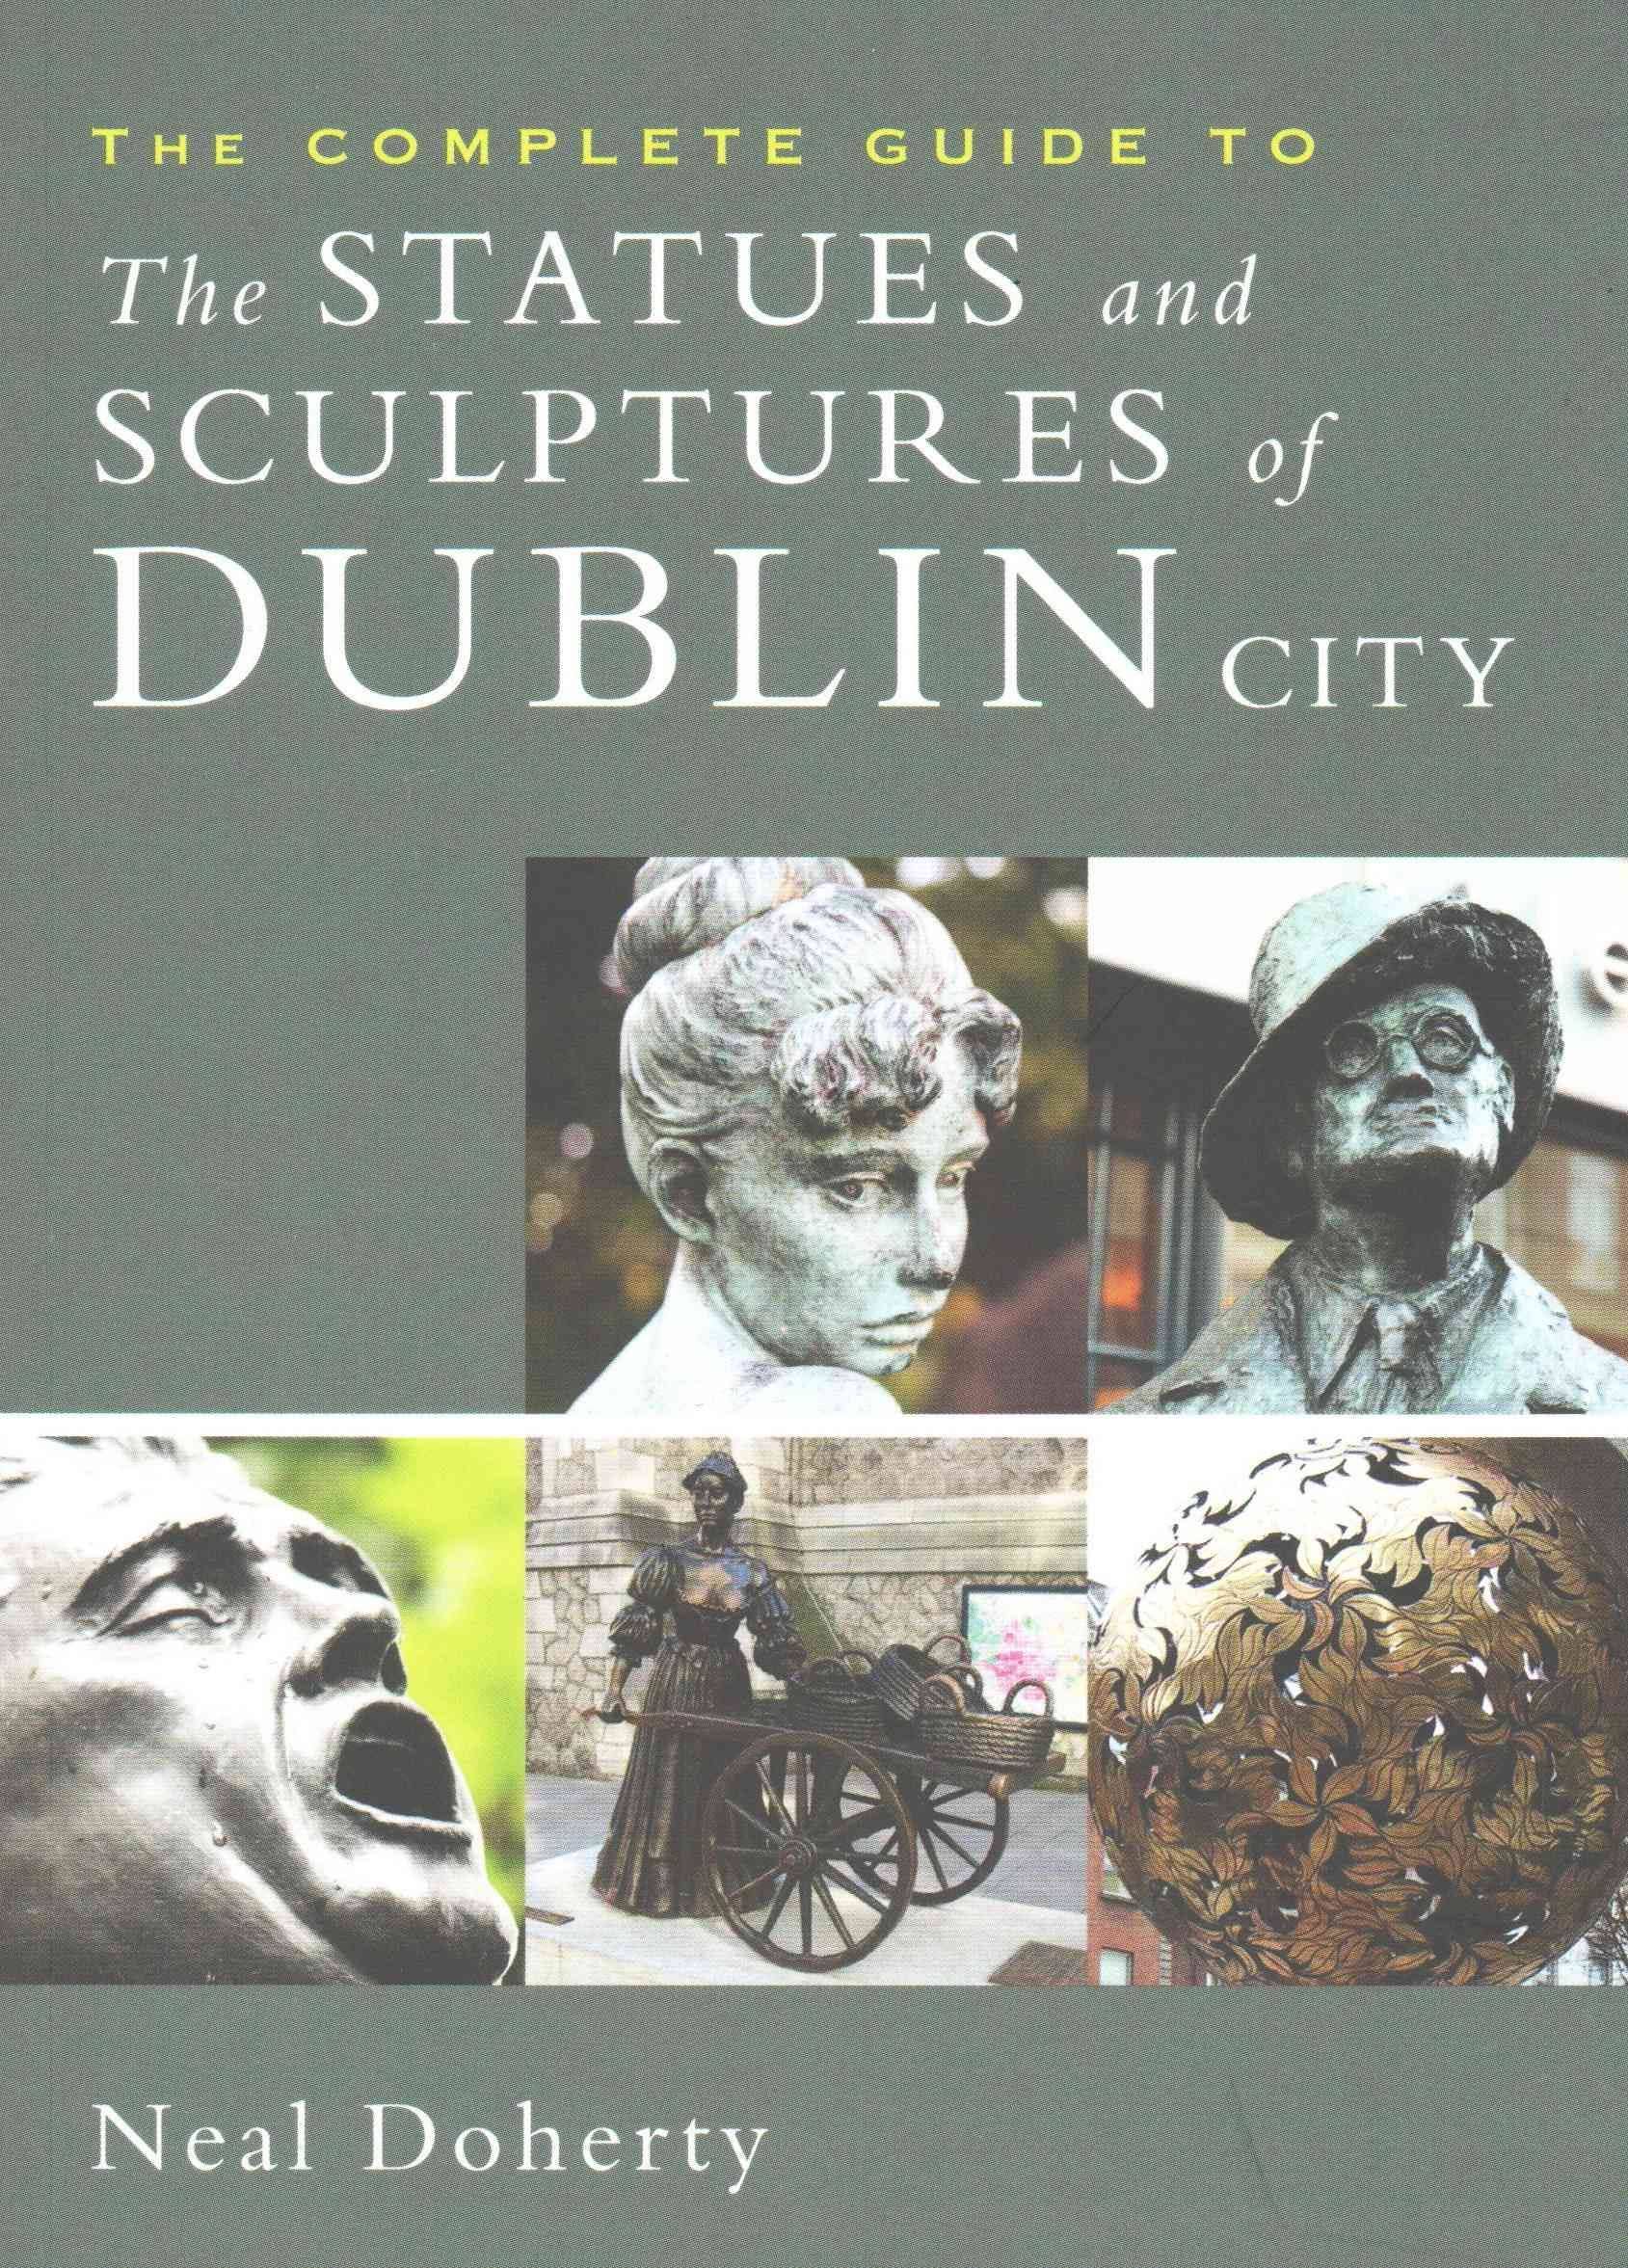 The complete guide to the statues and sculptures of Dublin City by Neal Doherty